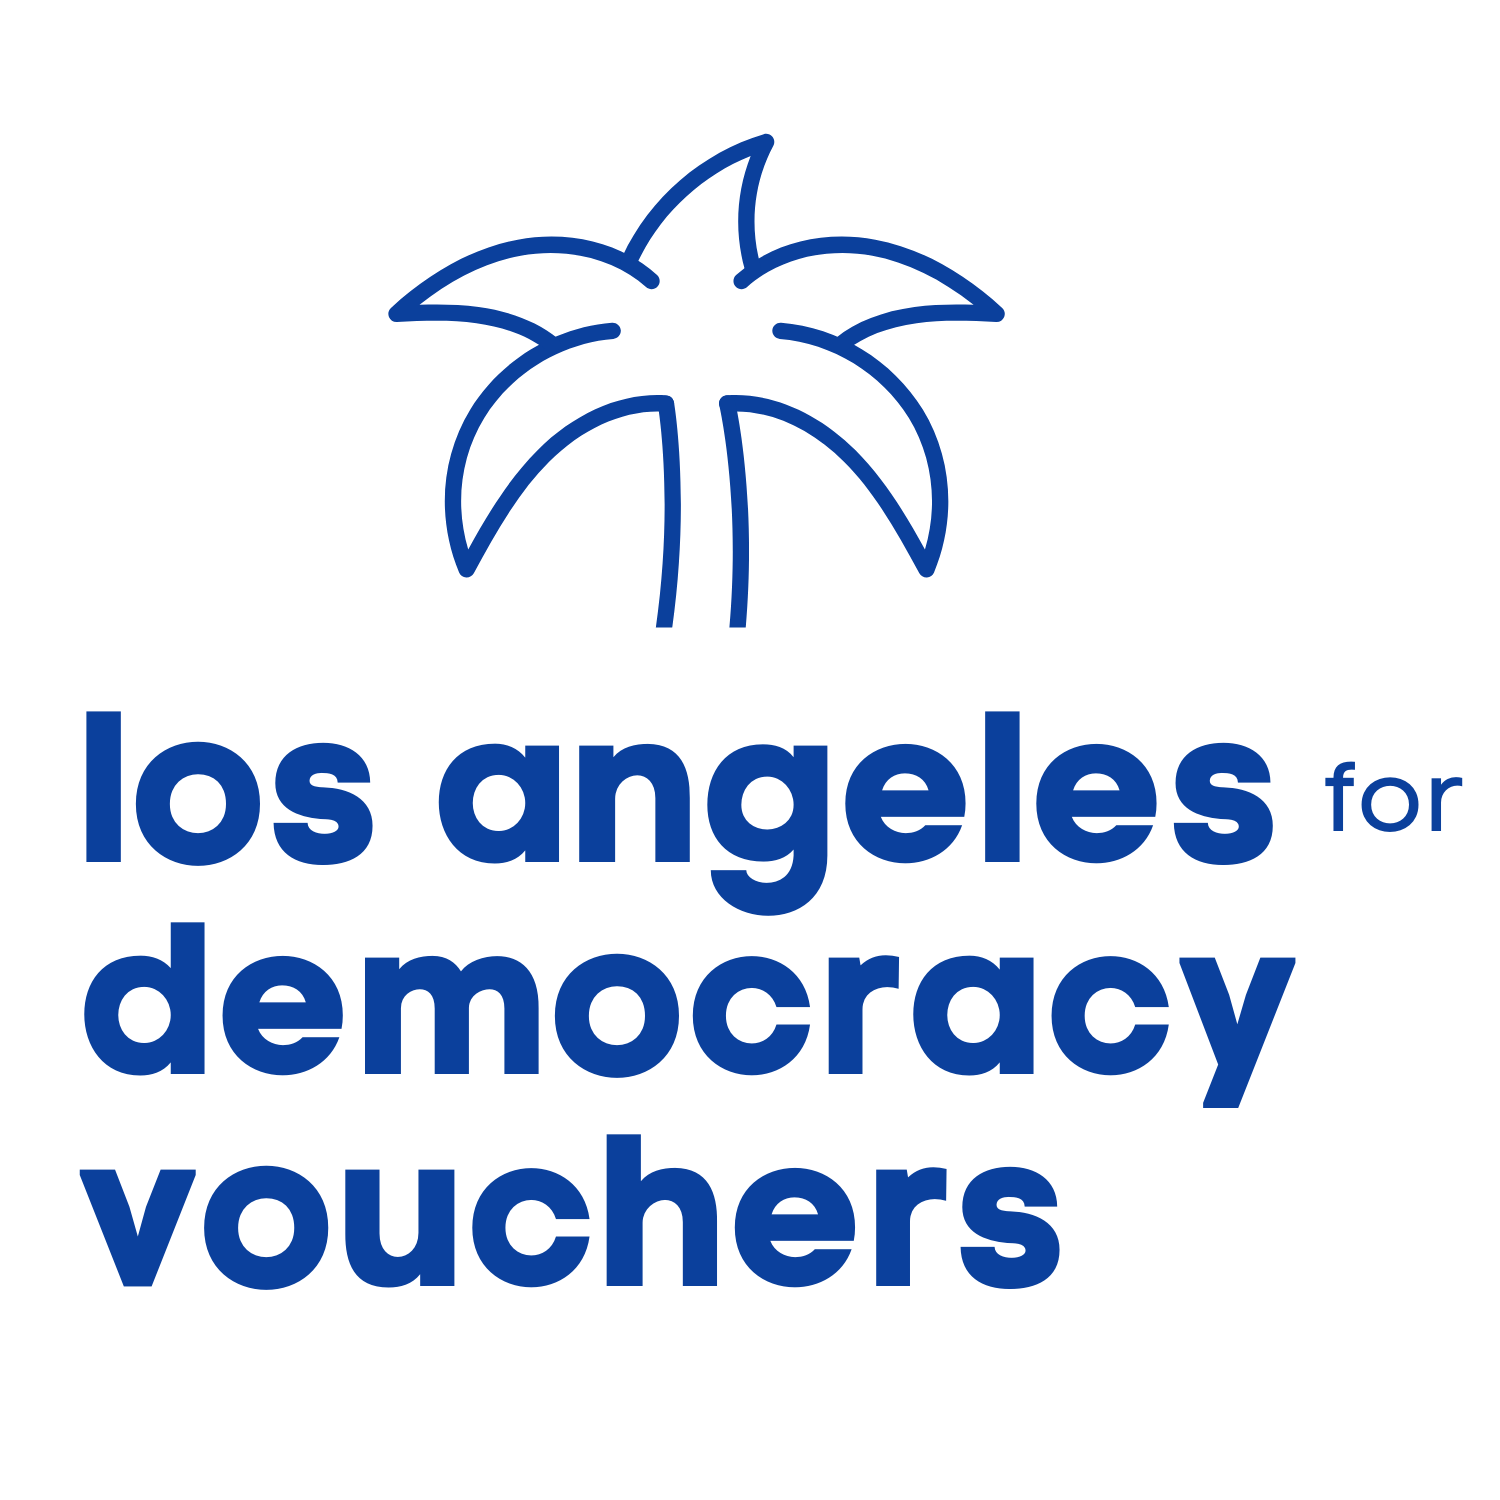 Los Angeles for Democracy Vouchers